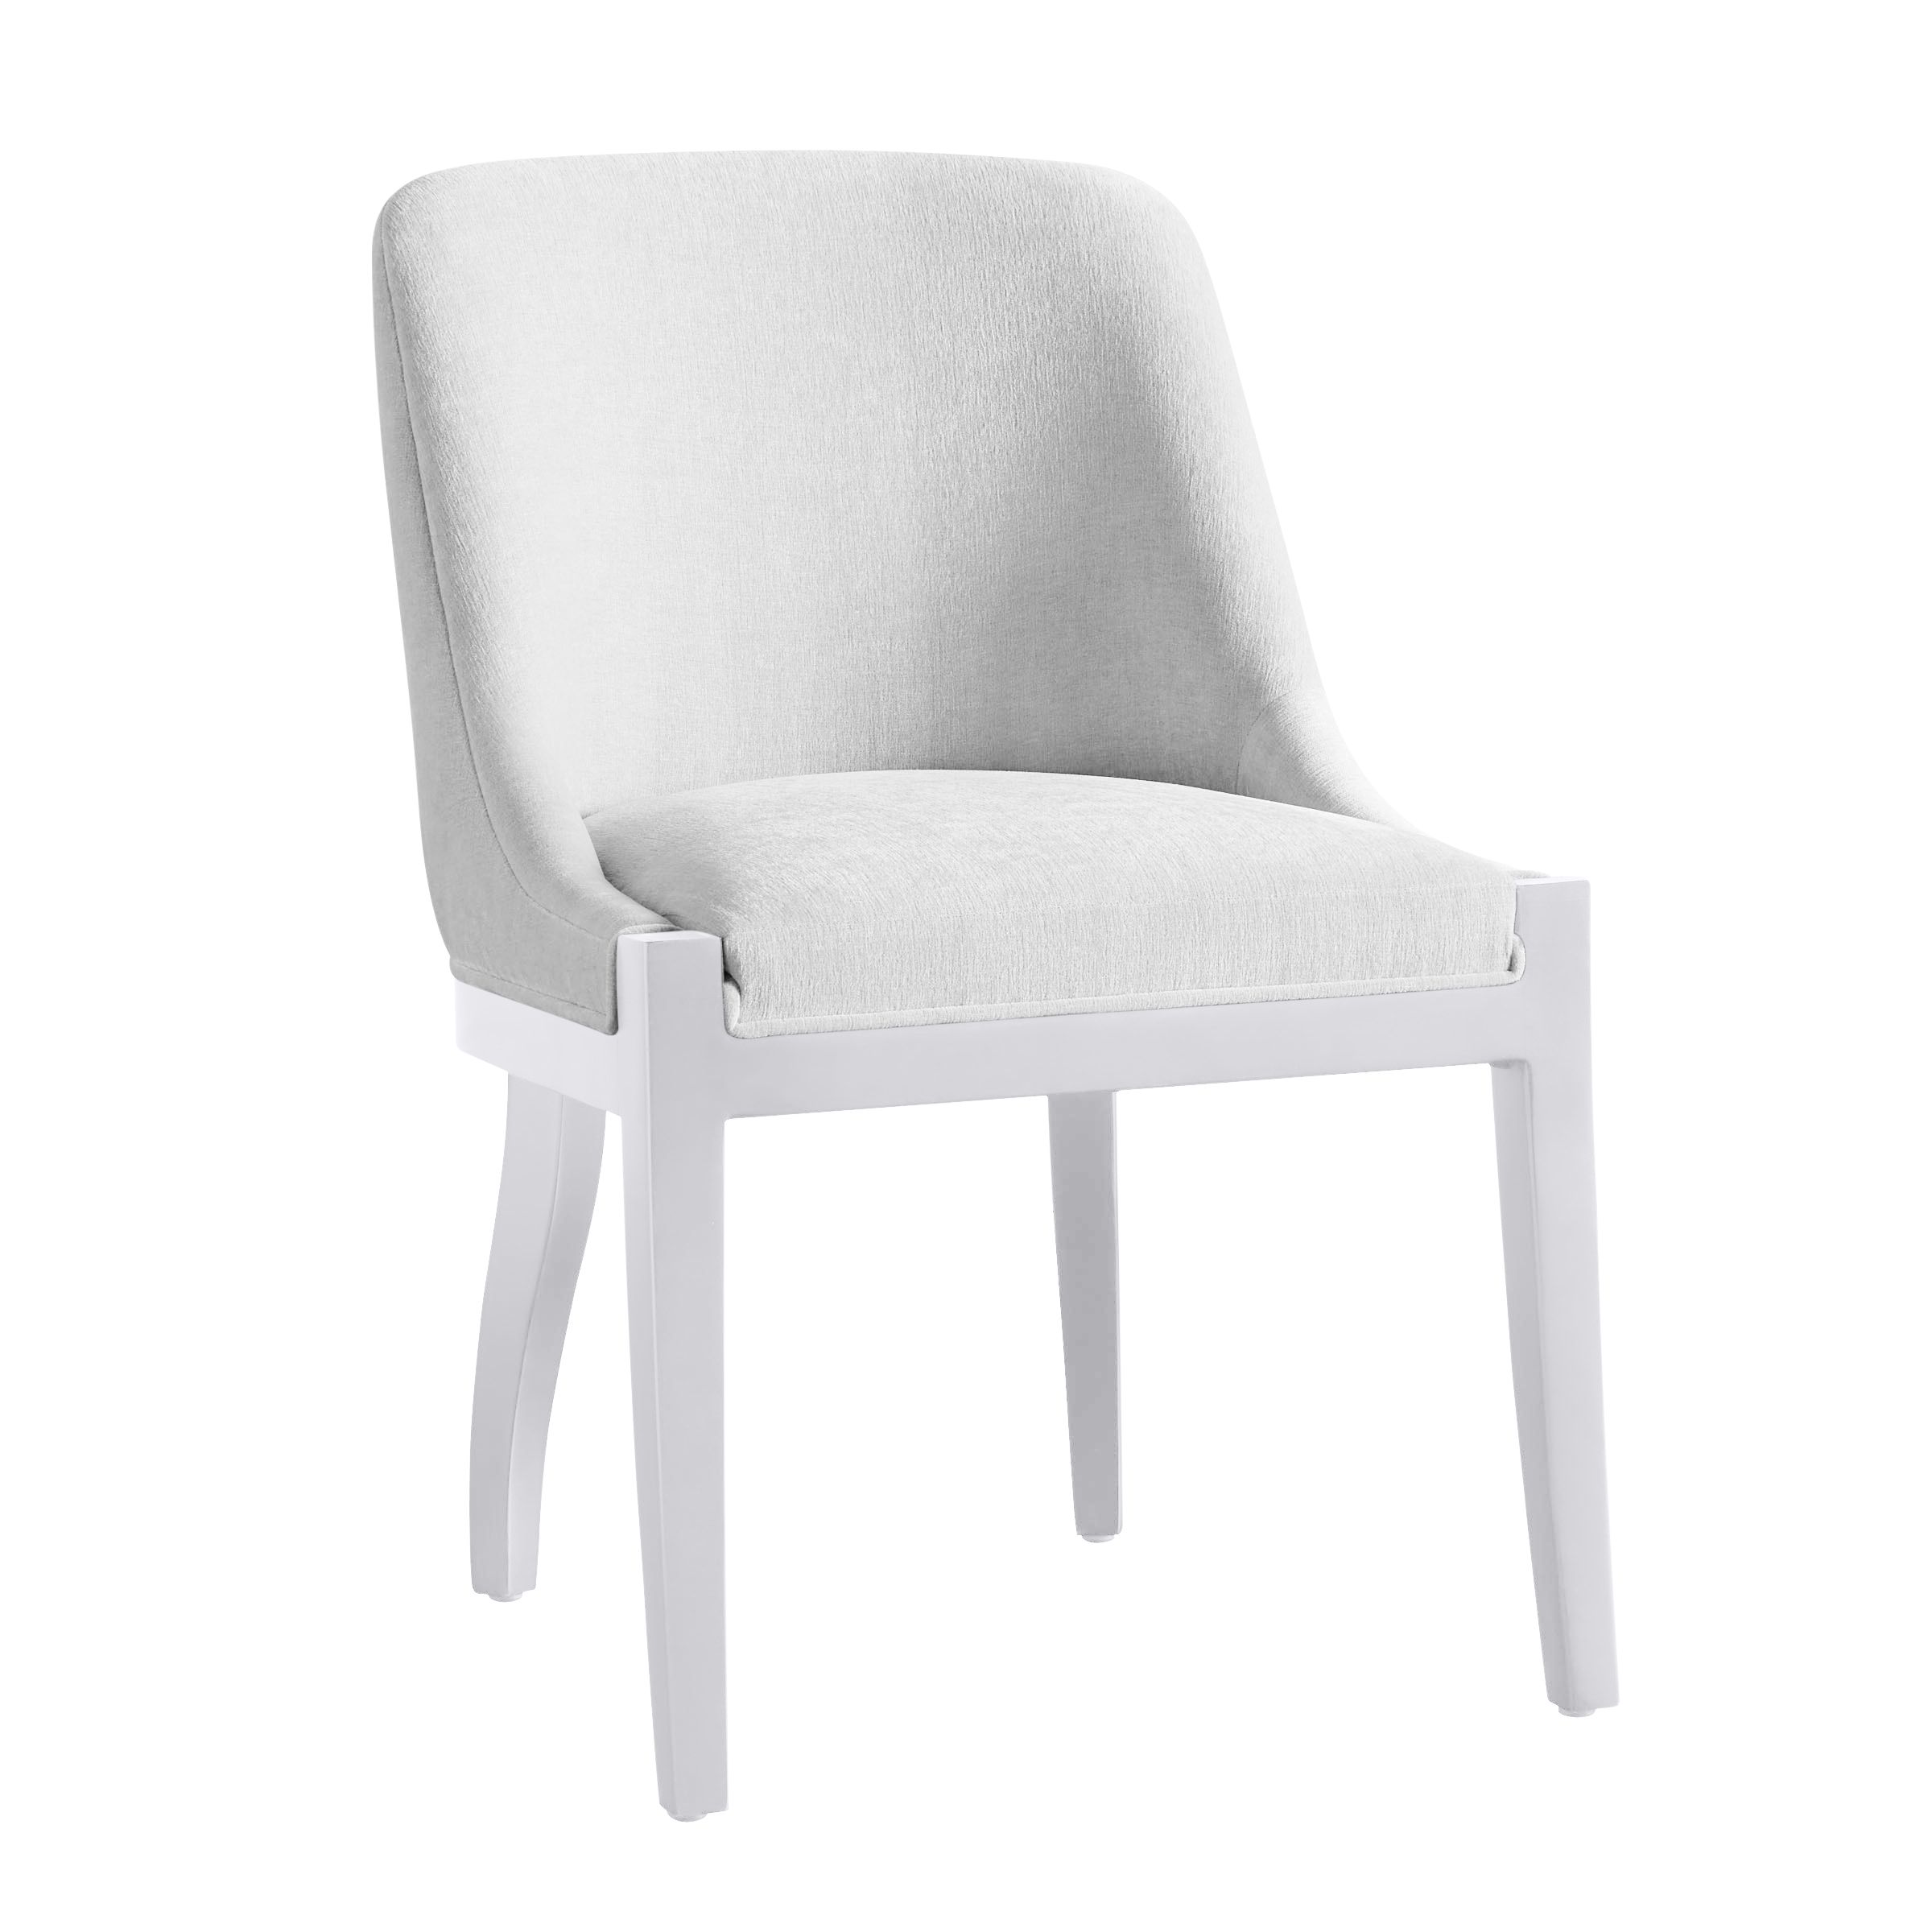 Lily Dining Chair - High Gloss White | Z Gallerie